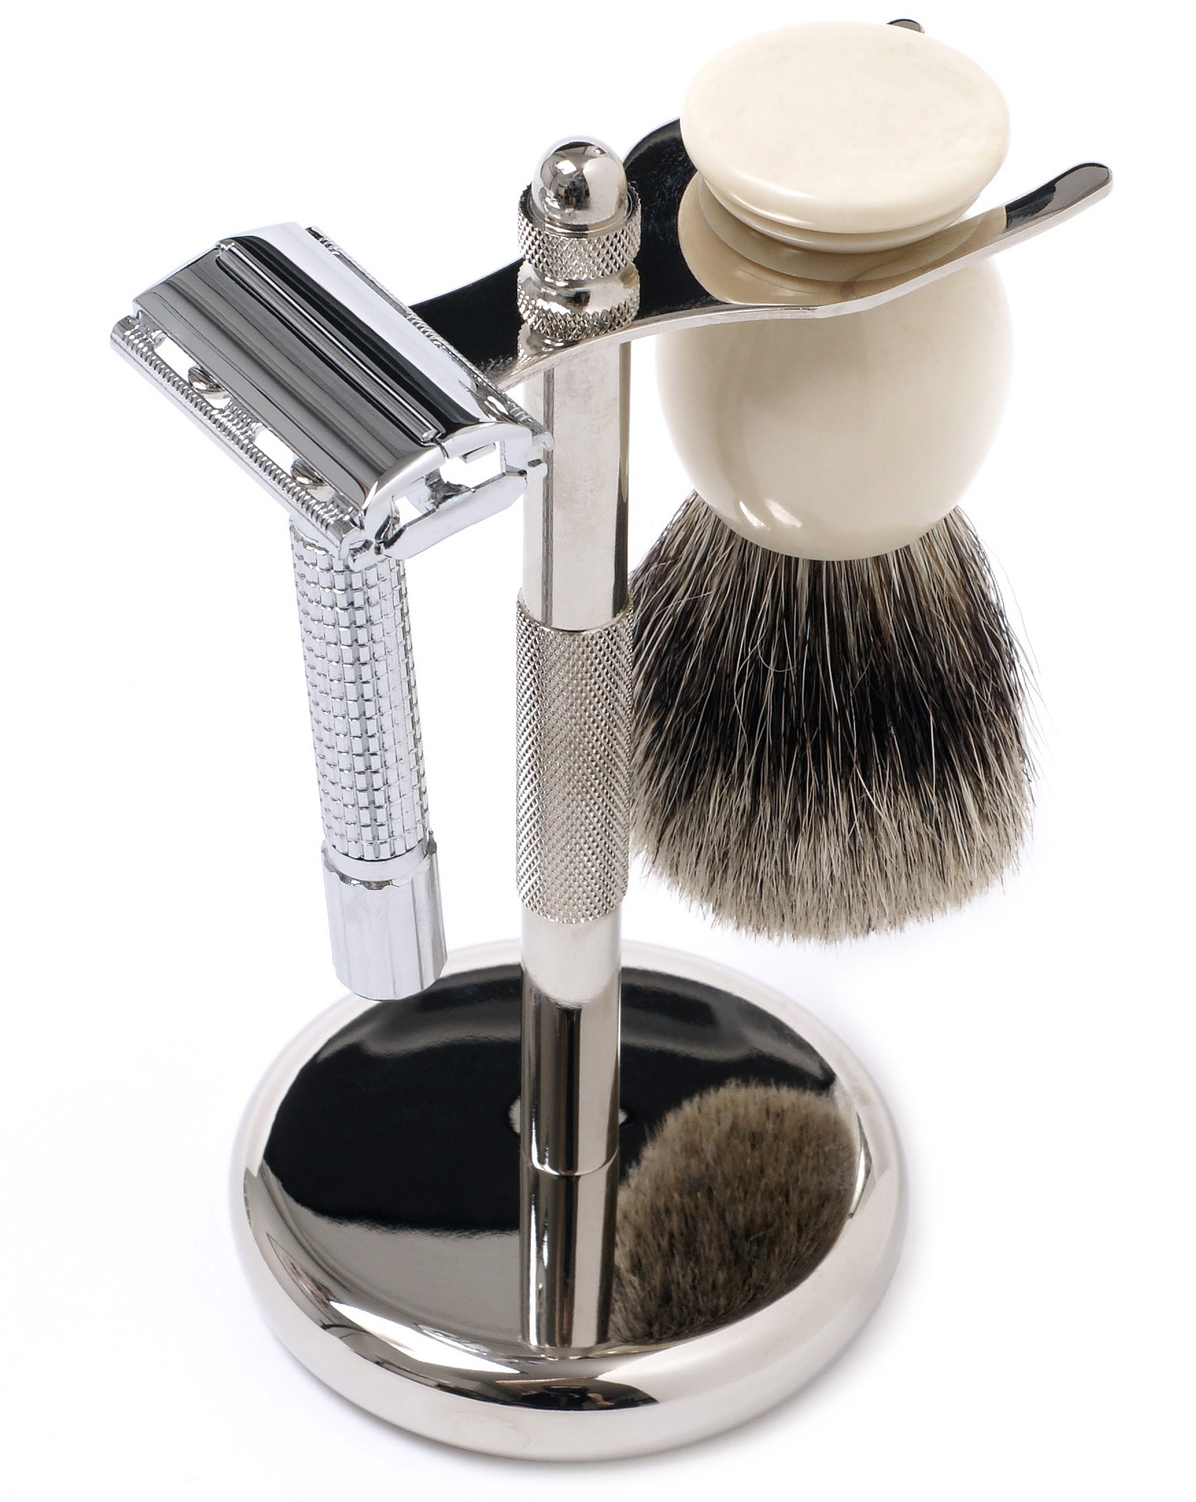 Tips for a Great Shave!